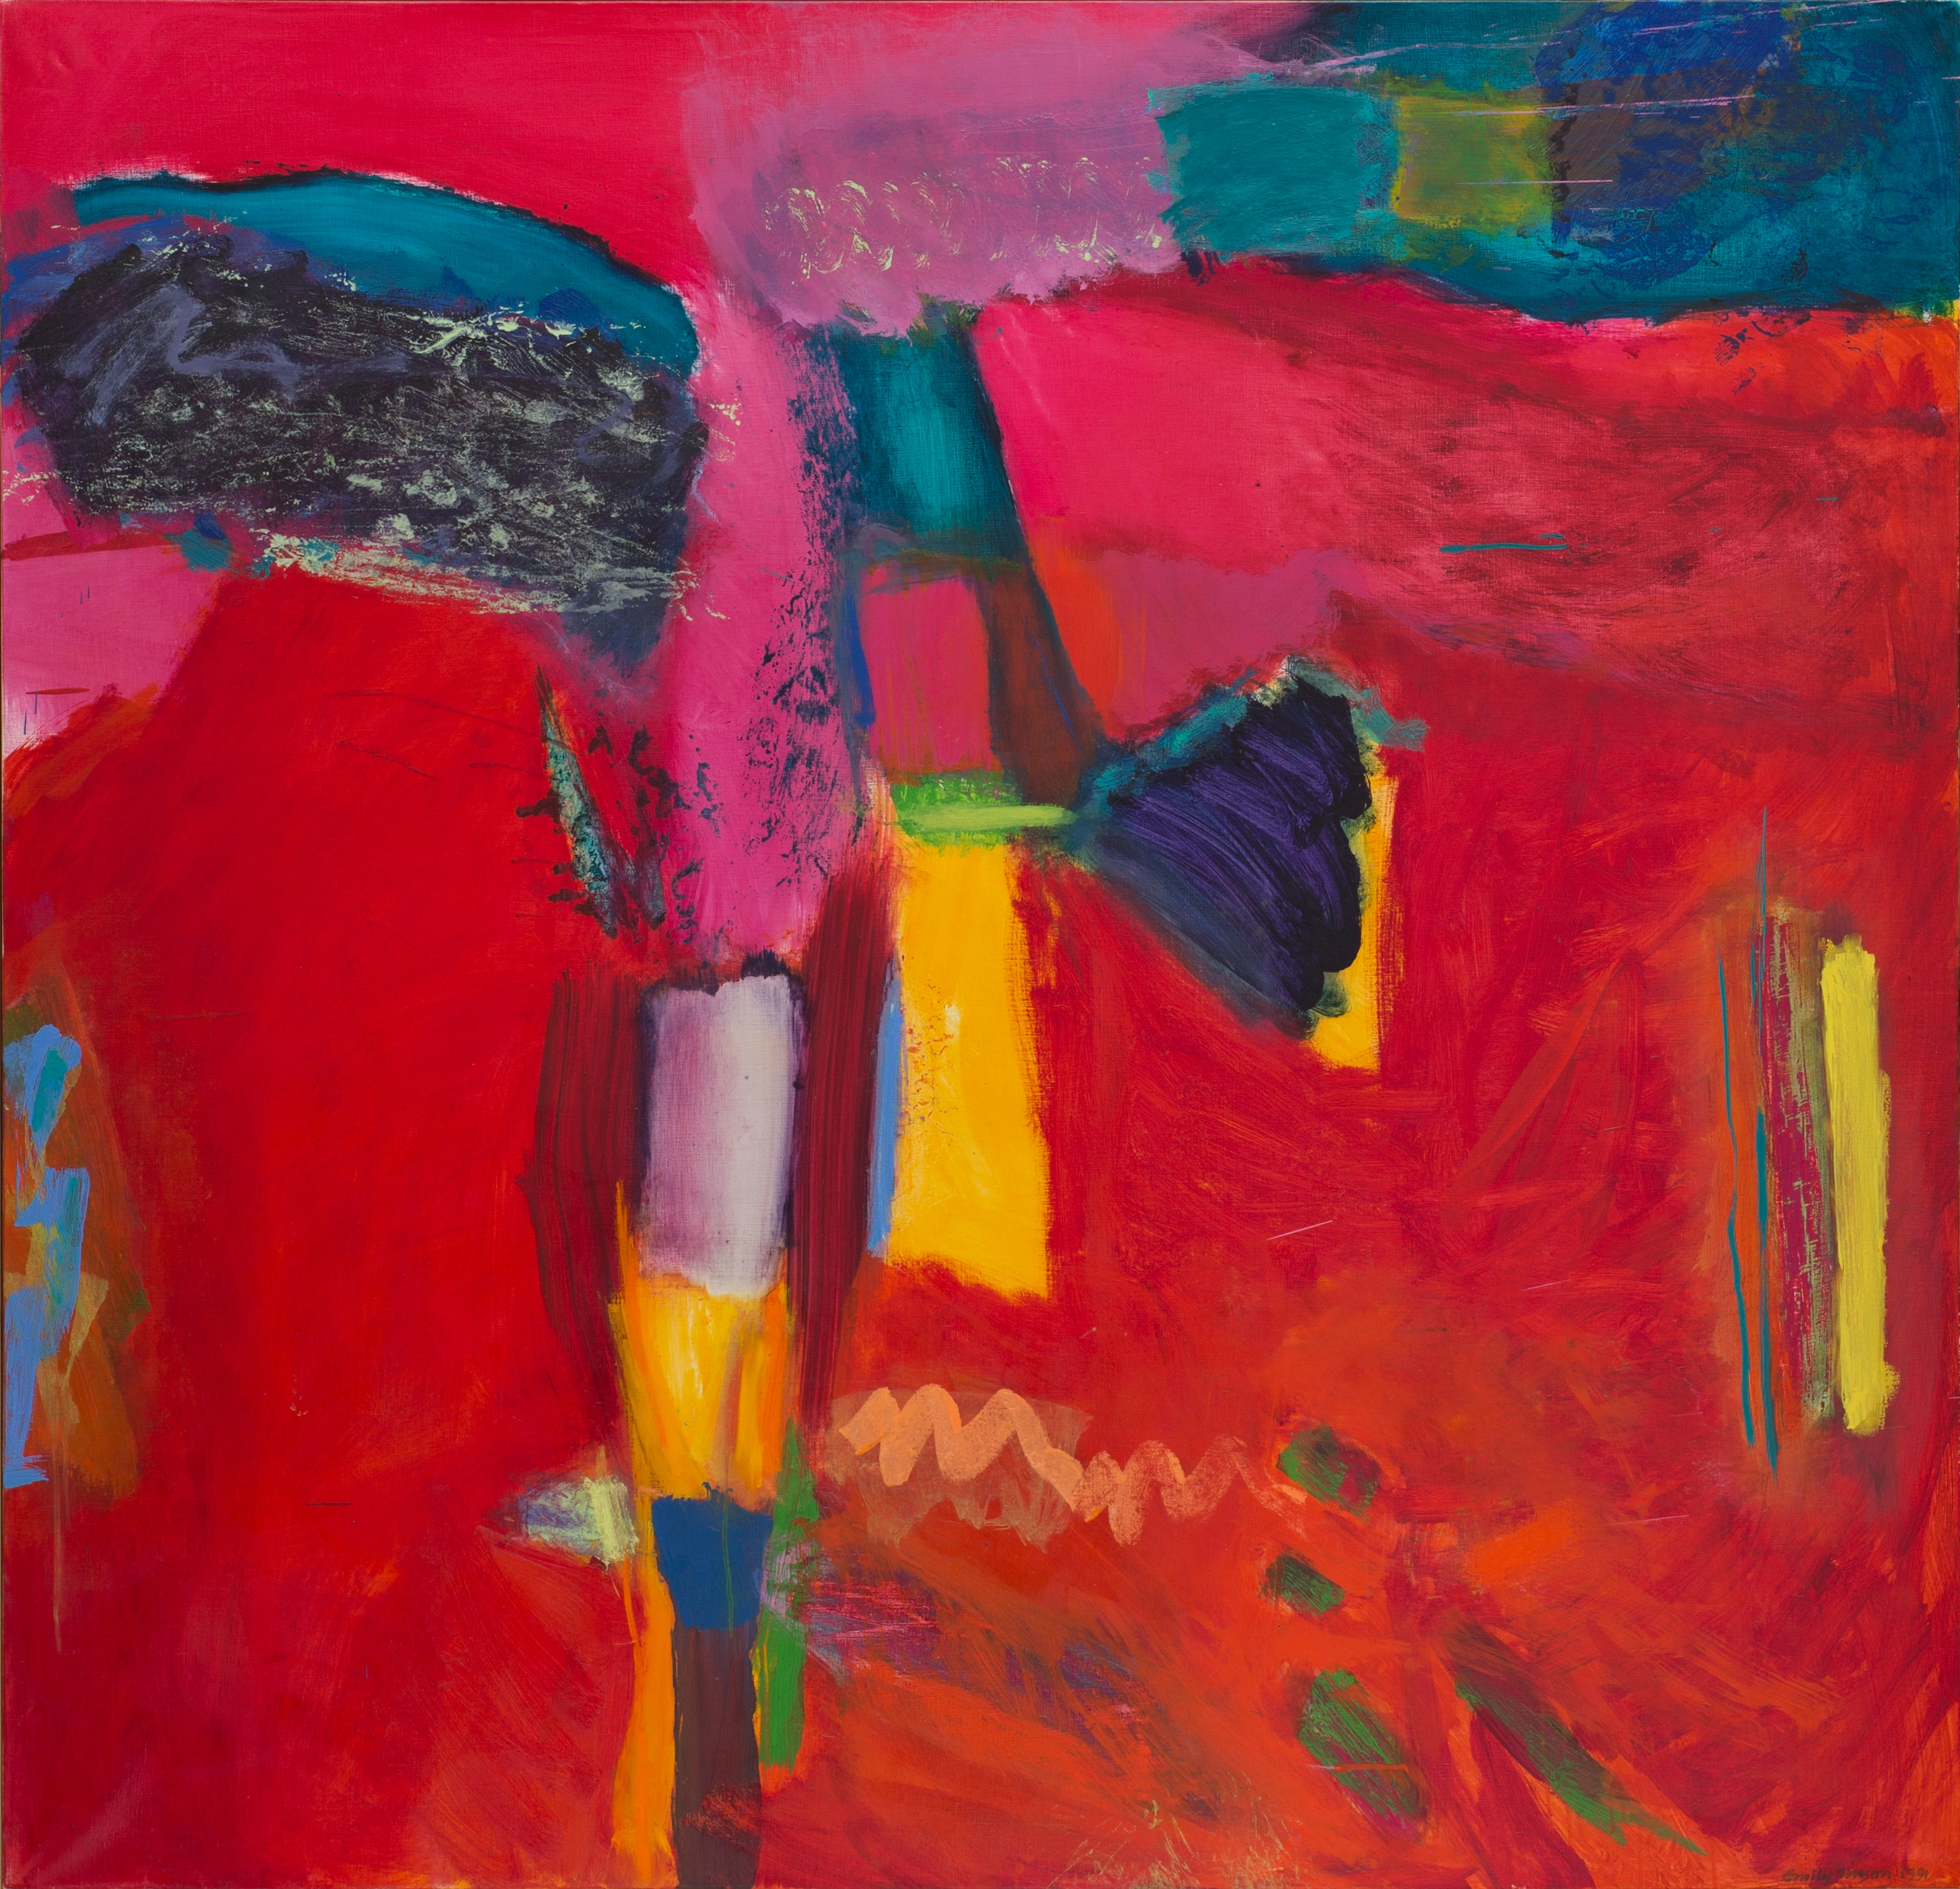 Abstract oil painting comprised of varying red shades. Patches of blue, yellow, green, and magenta brushstrokes appear at the upper corners and center of the composition.